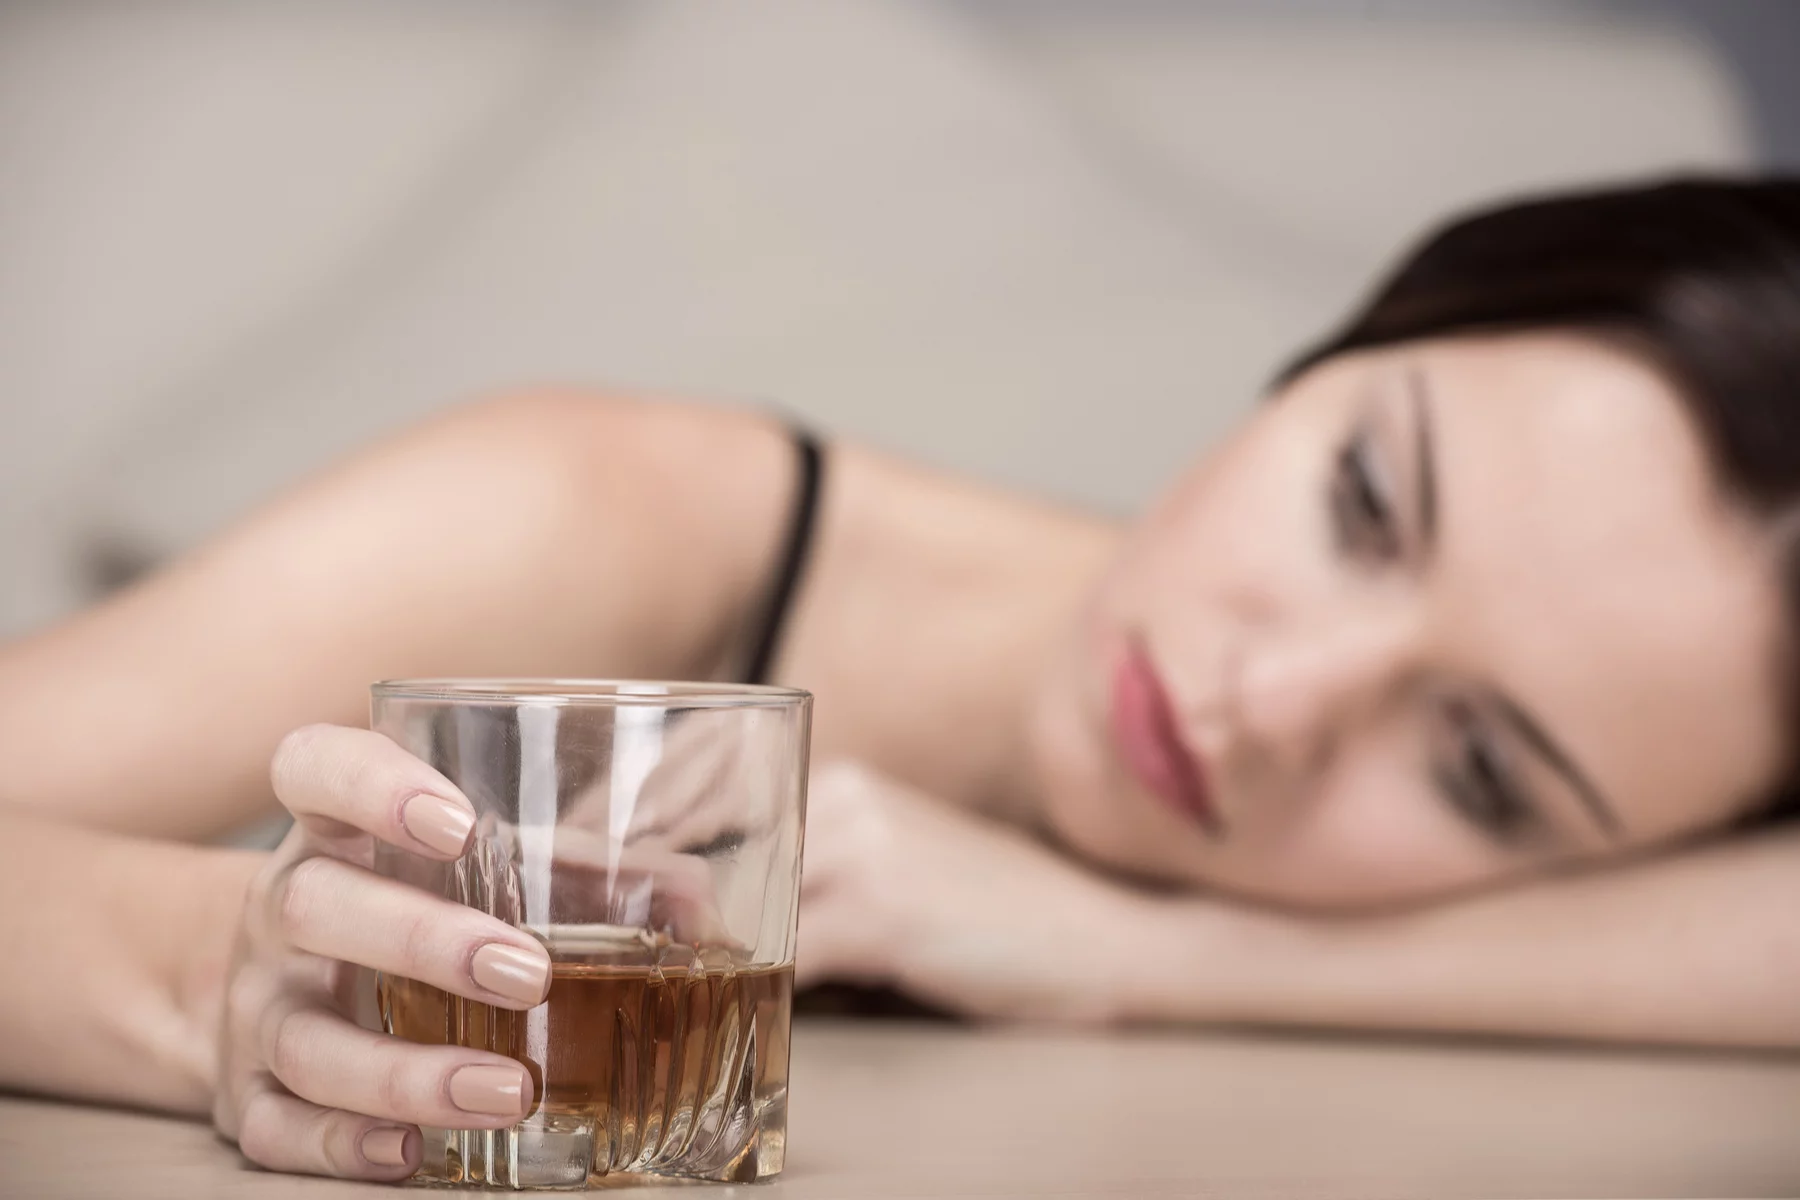 a woman struggling with alcohol addiction